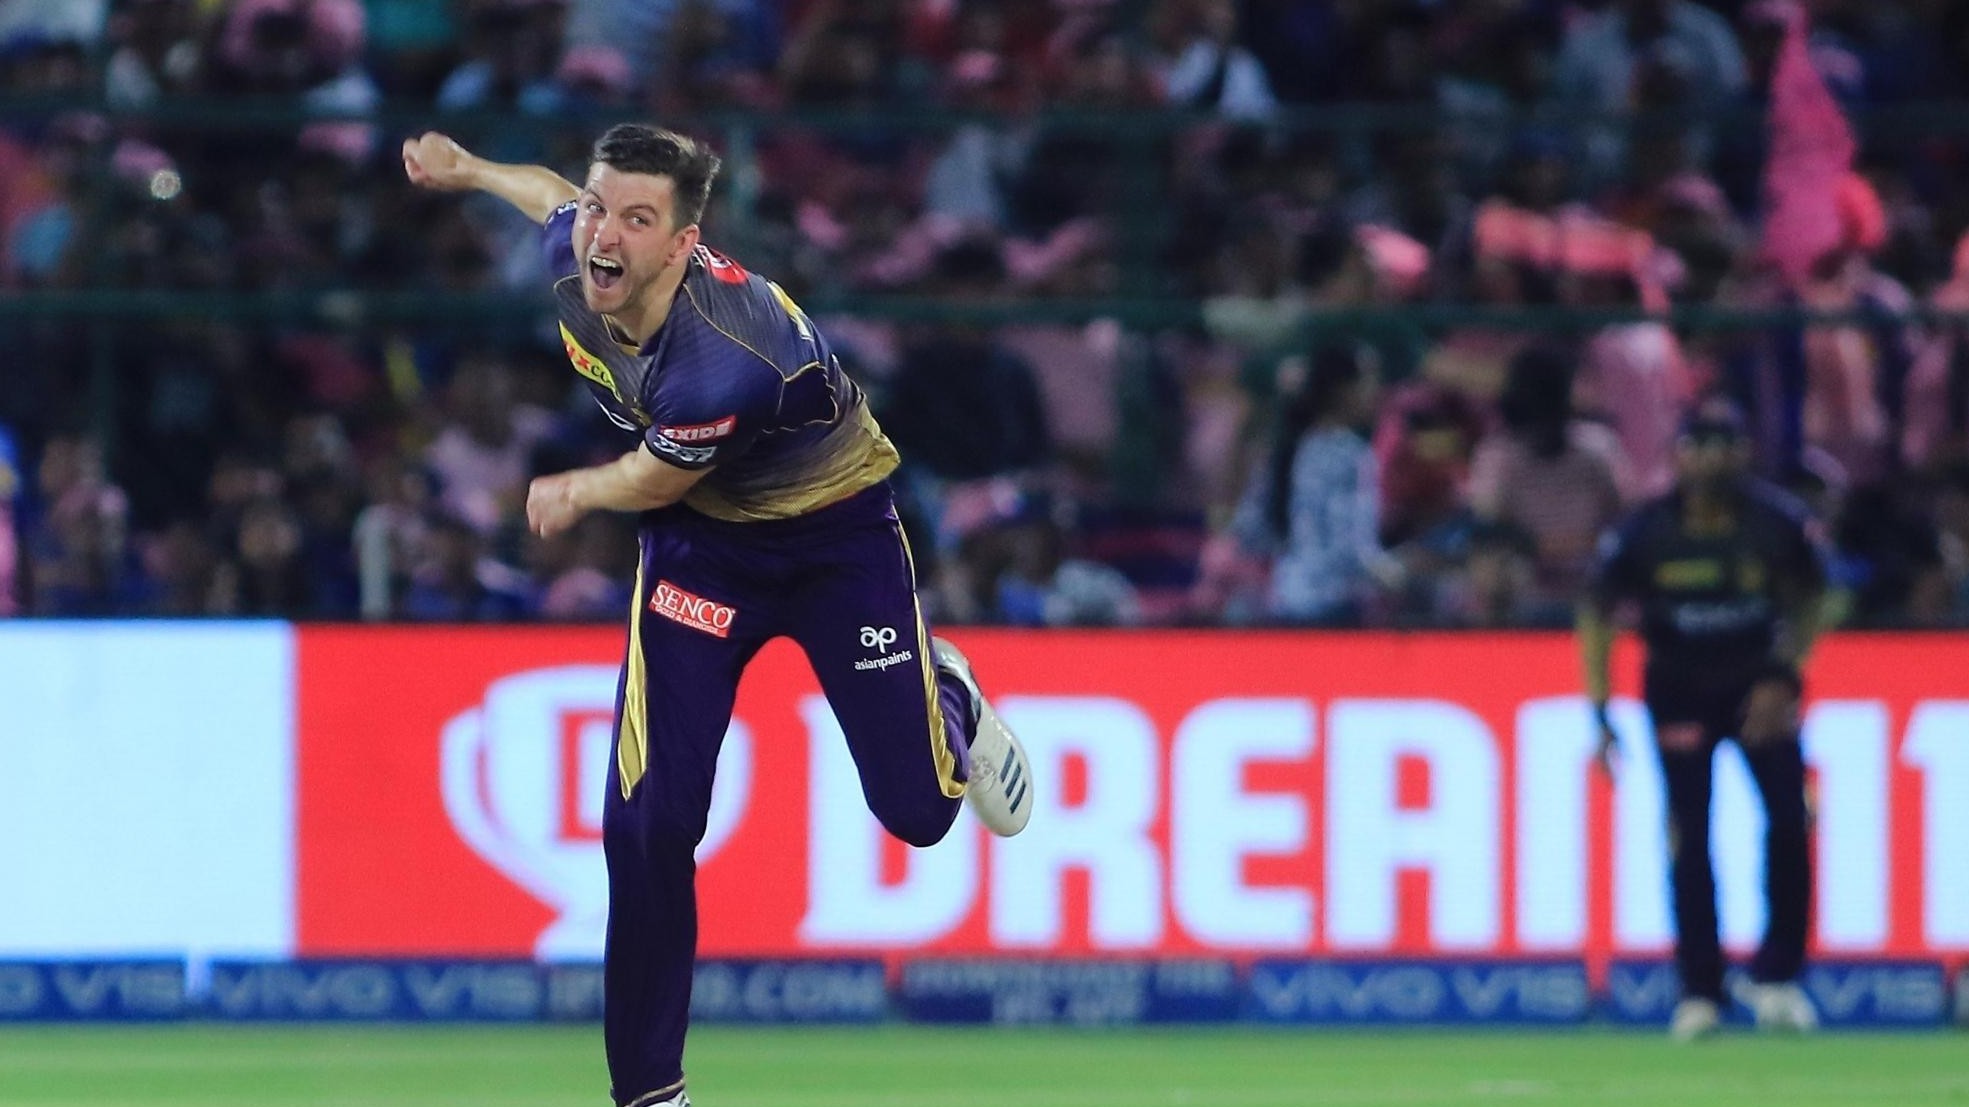 IPL 2020: Shoulder injury rules Harry Gurney out of upcoming IPL and T20 Blast